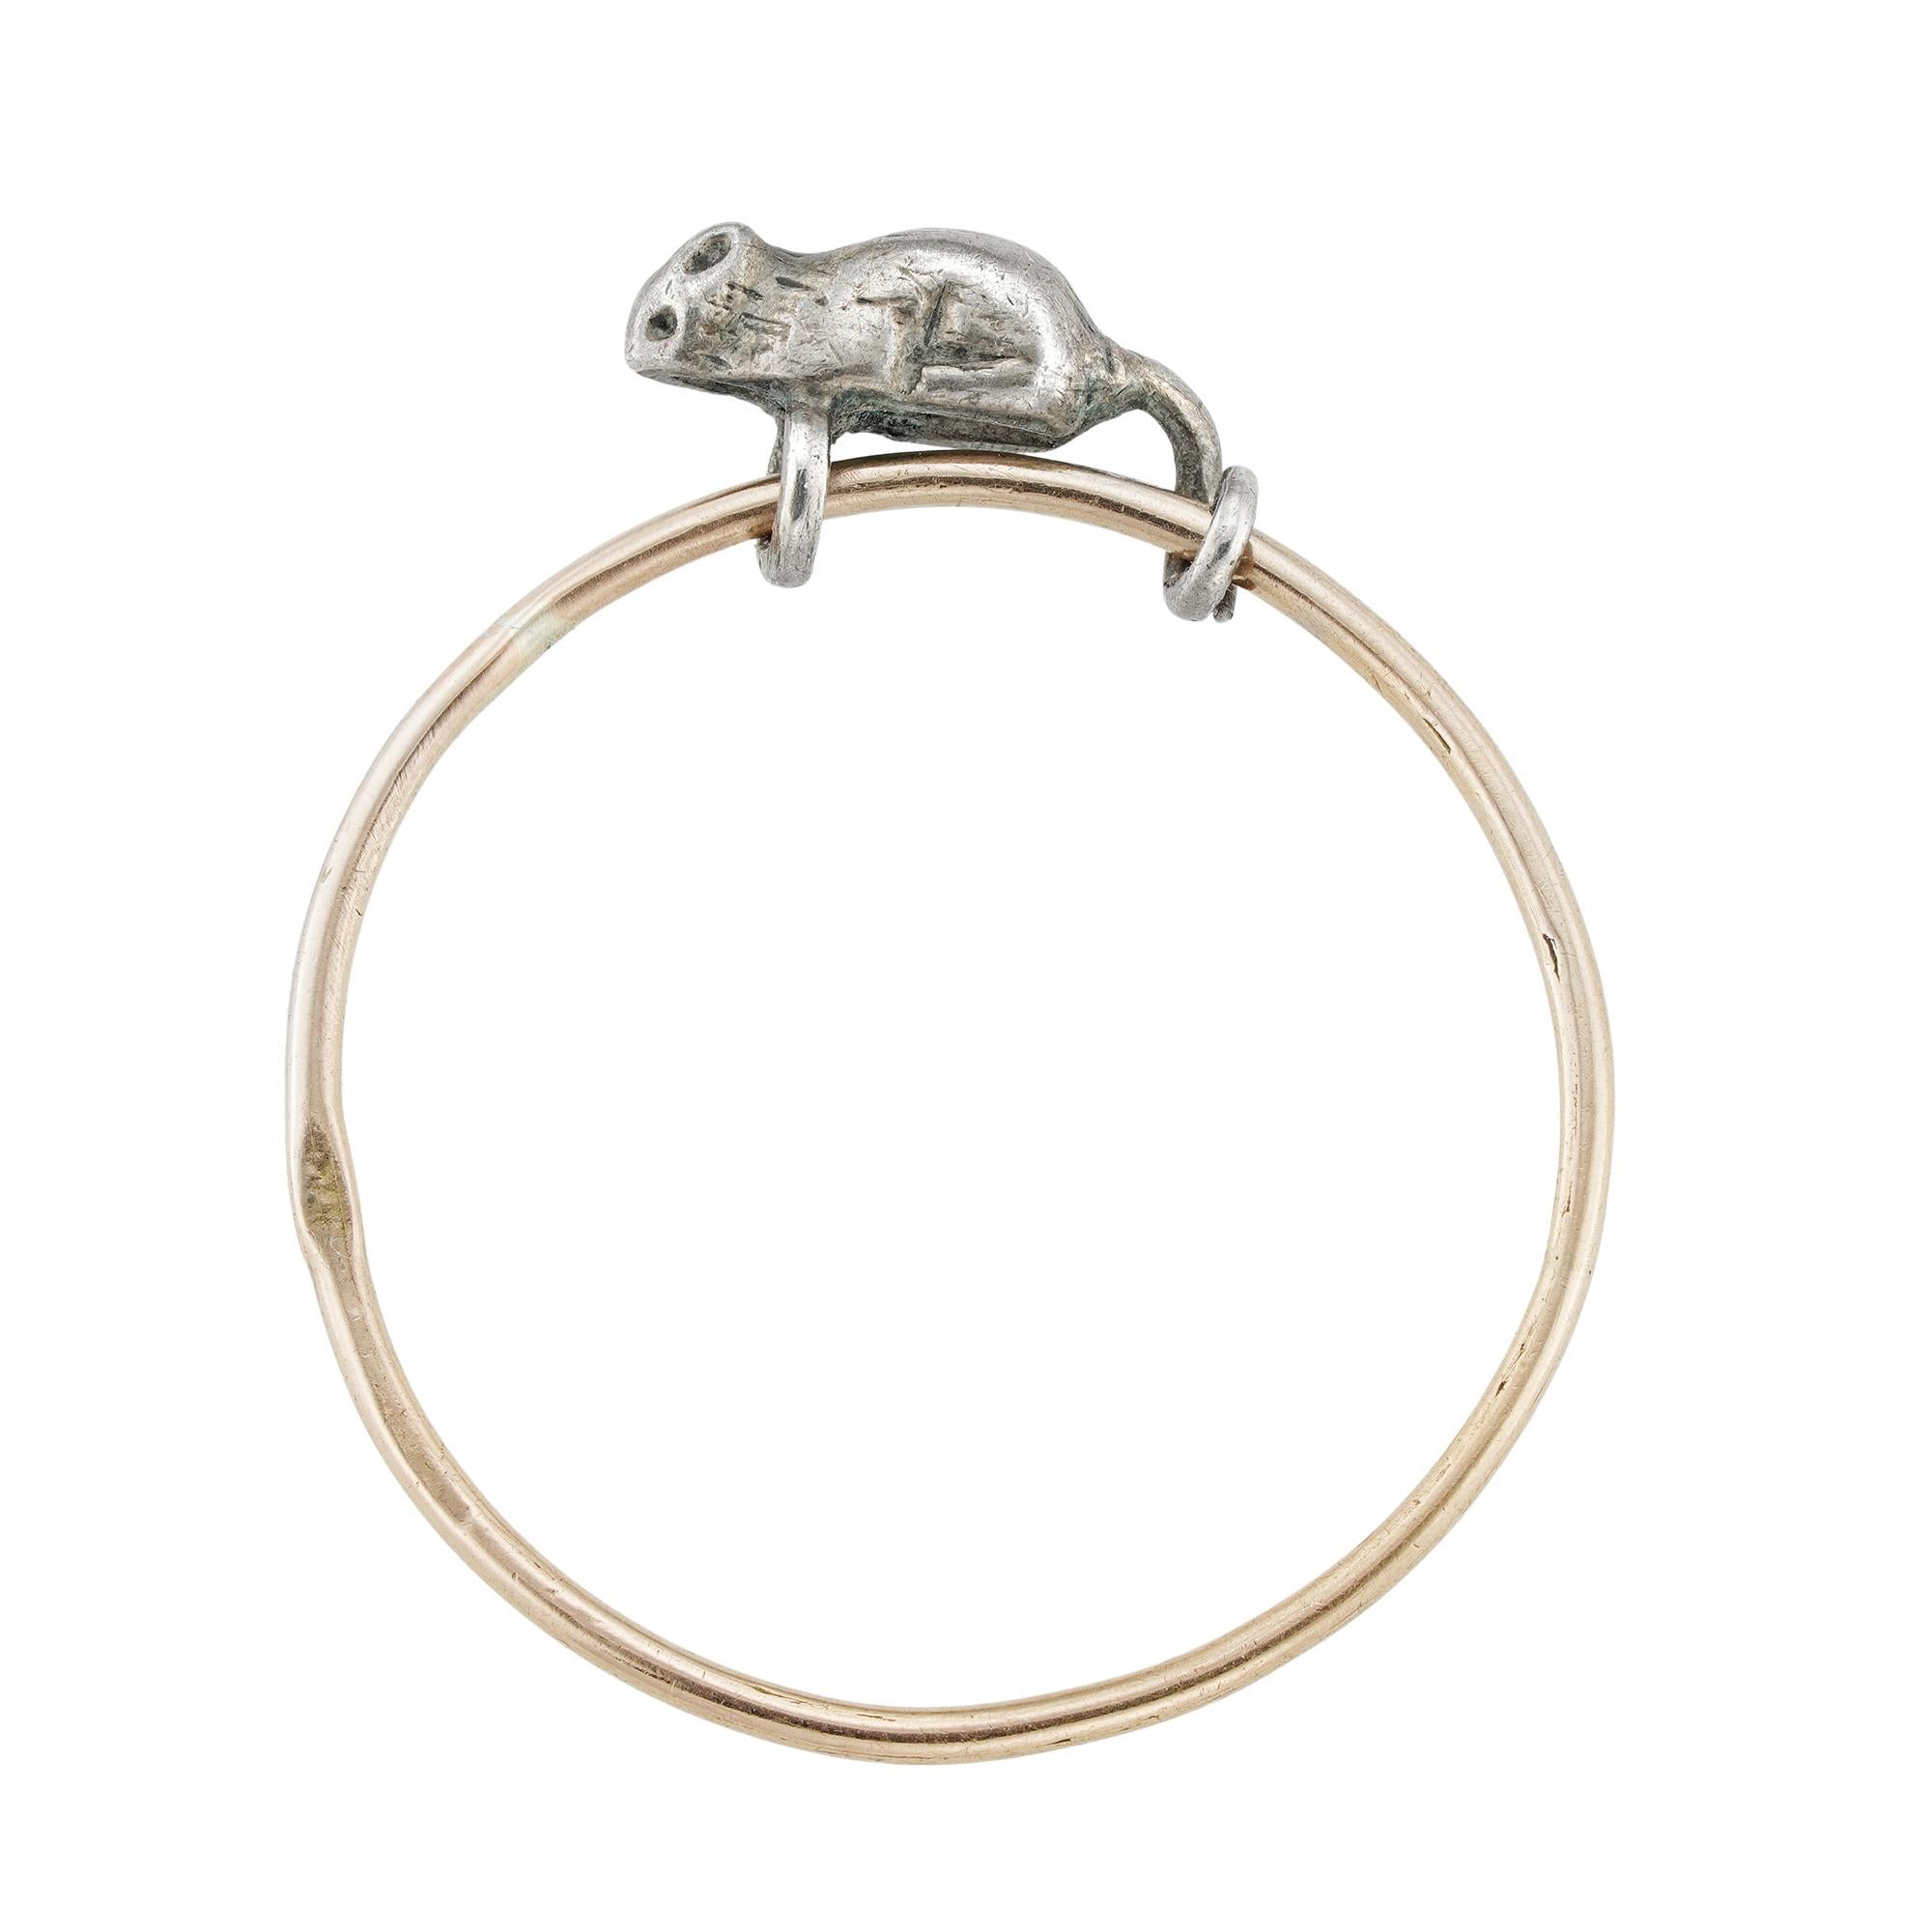 A Turn-of-the-20th-century Russian mouse ring, the realistically carved silver mouse having its tail and its front feet wrapped around a rose-gold ring, the ring measuring 0.8mm wide, bearing Russian workmaster’s mark possibly for Tchelkanov Dmitry